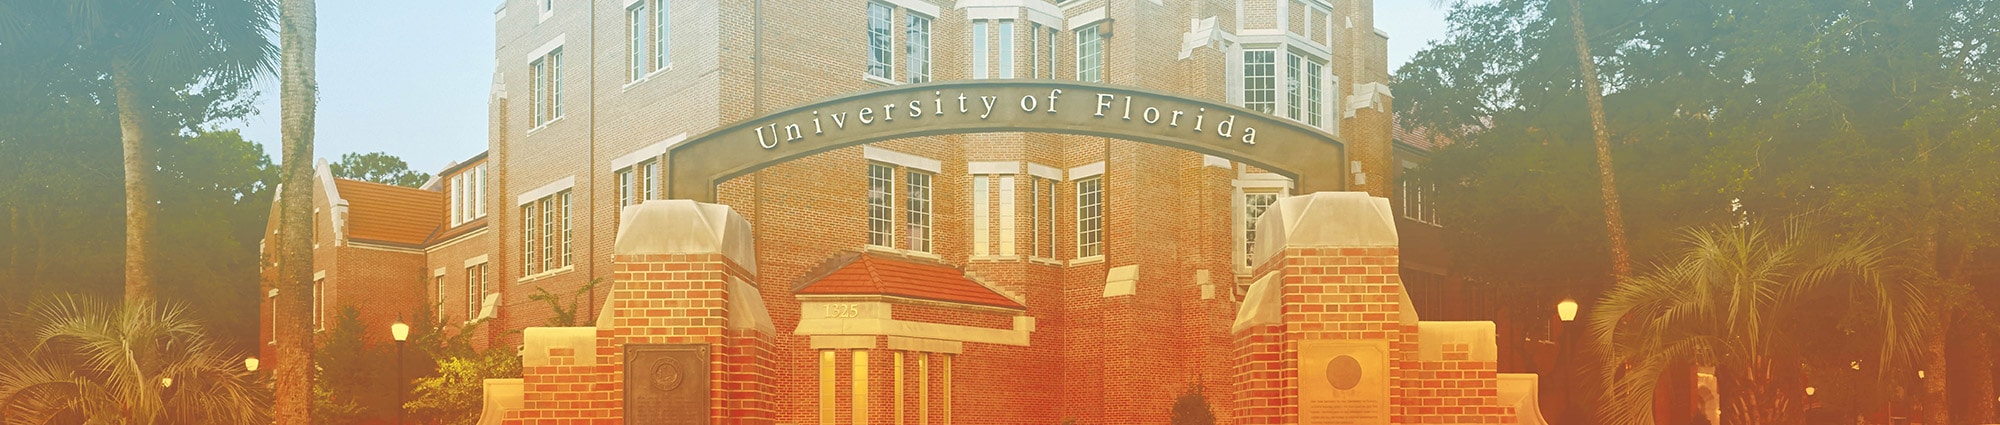 University of Florida gateway with Heavener Hall in the background